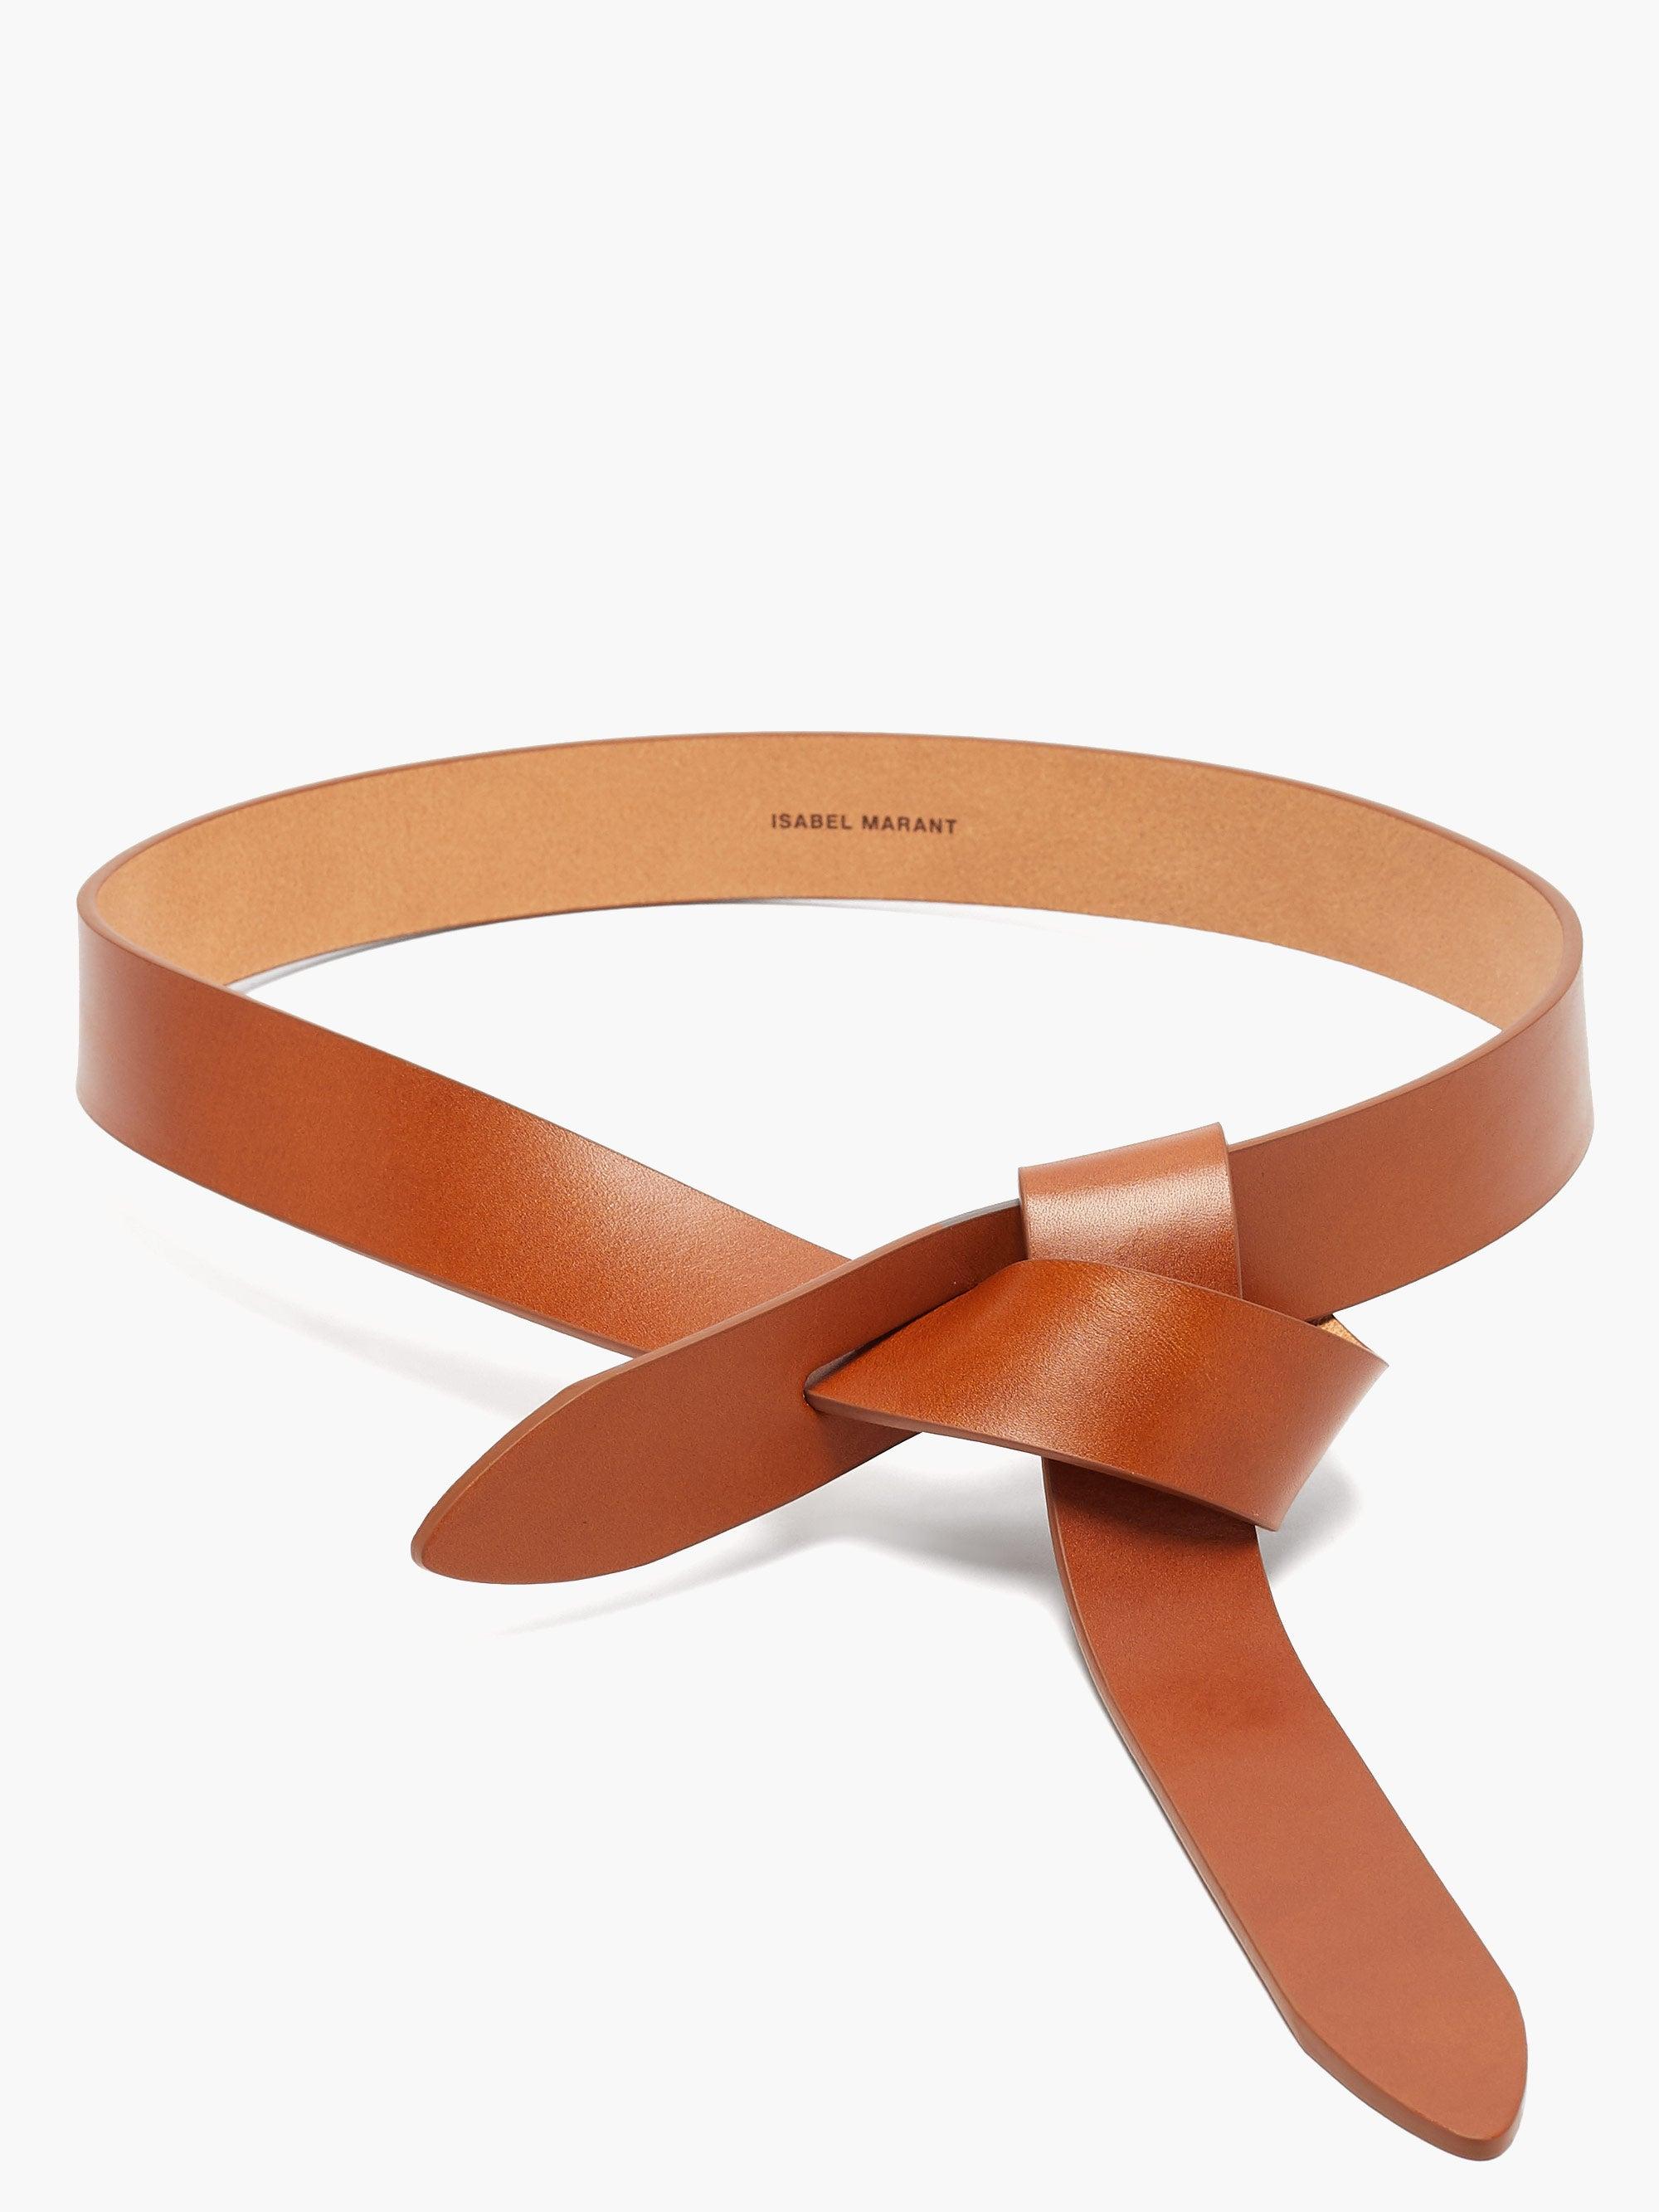 Isabel Marant Lecce Leather Belt in Tan (Brown) - Lyst